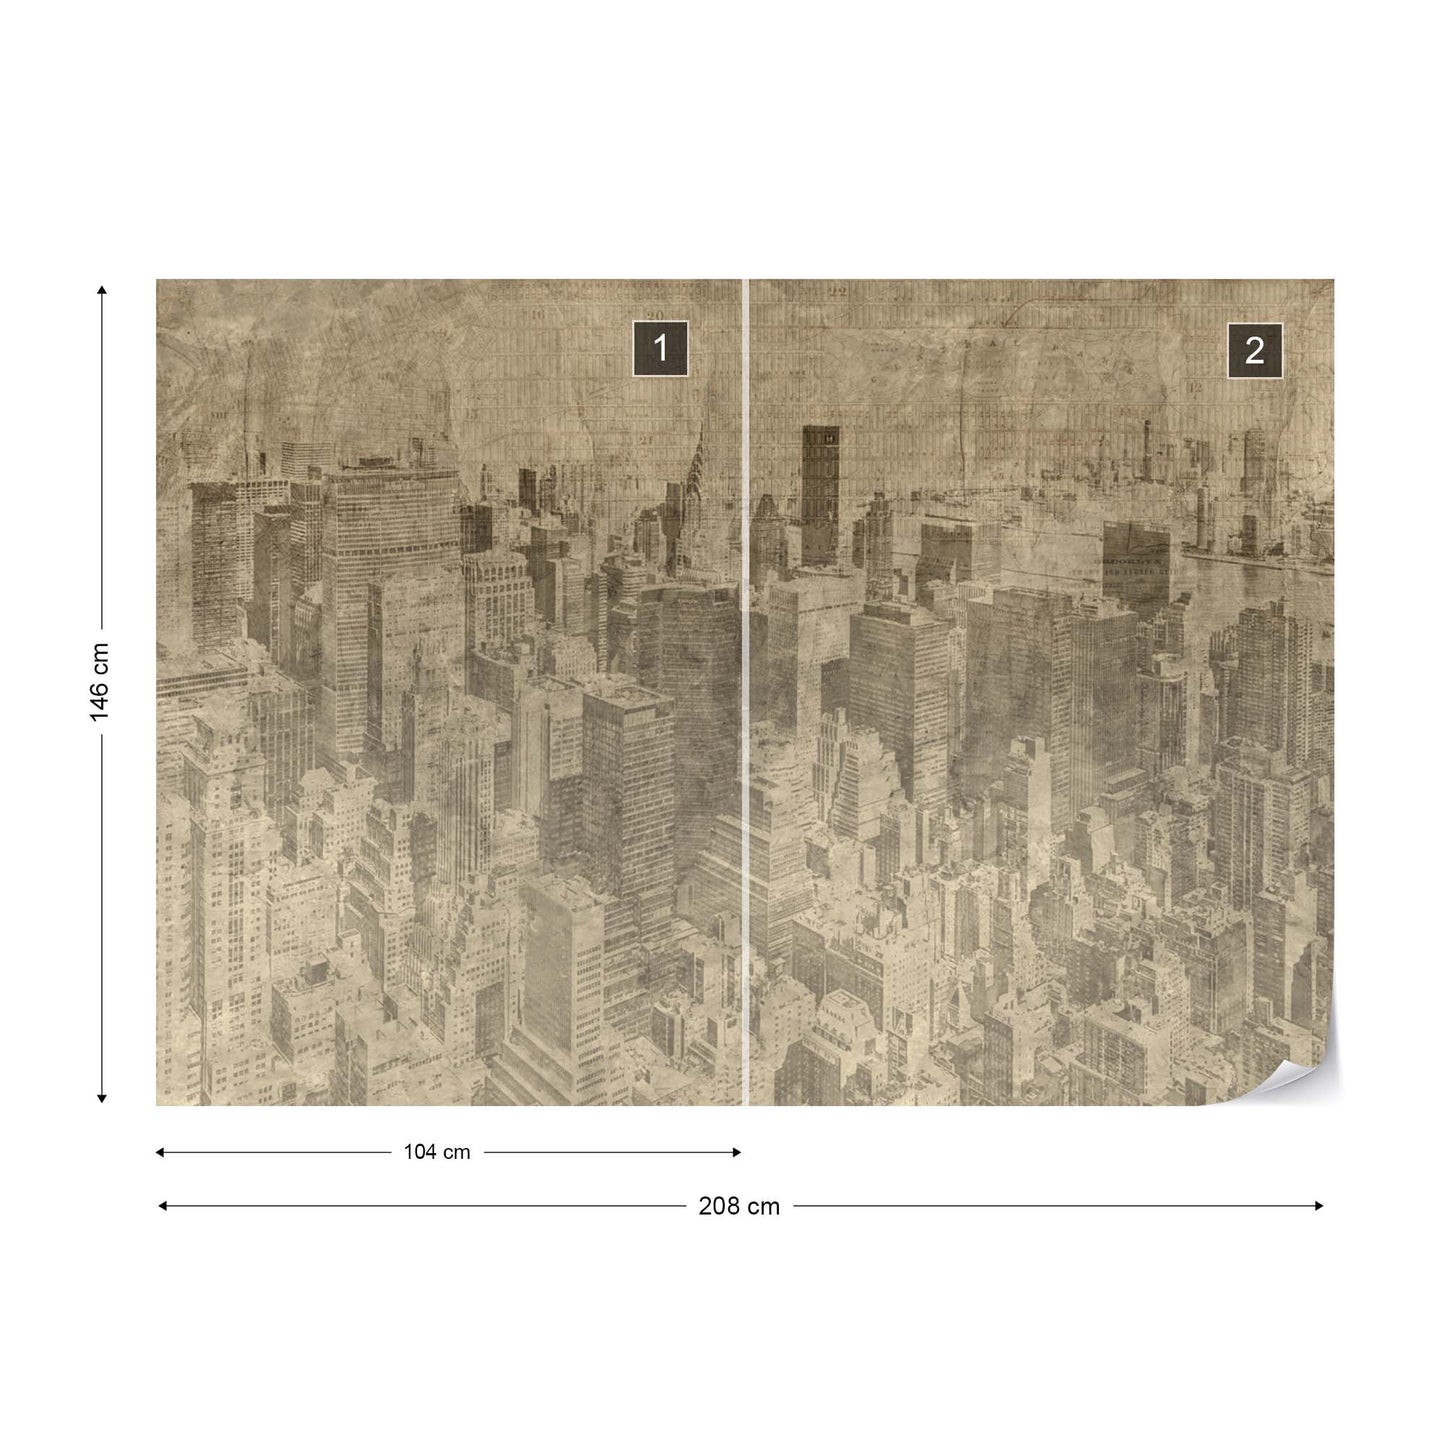 New York City Grunge I Sepia Wallpaper Waterproof for Rooms Bathroom Kitchen - USTAD HOME